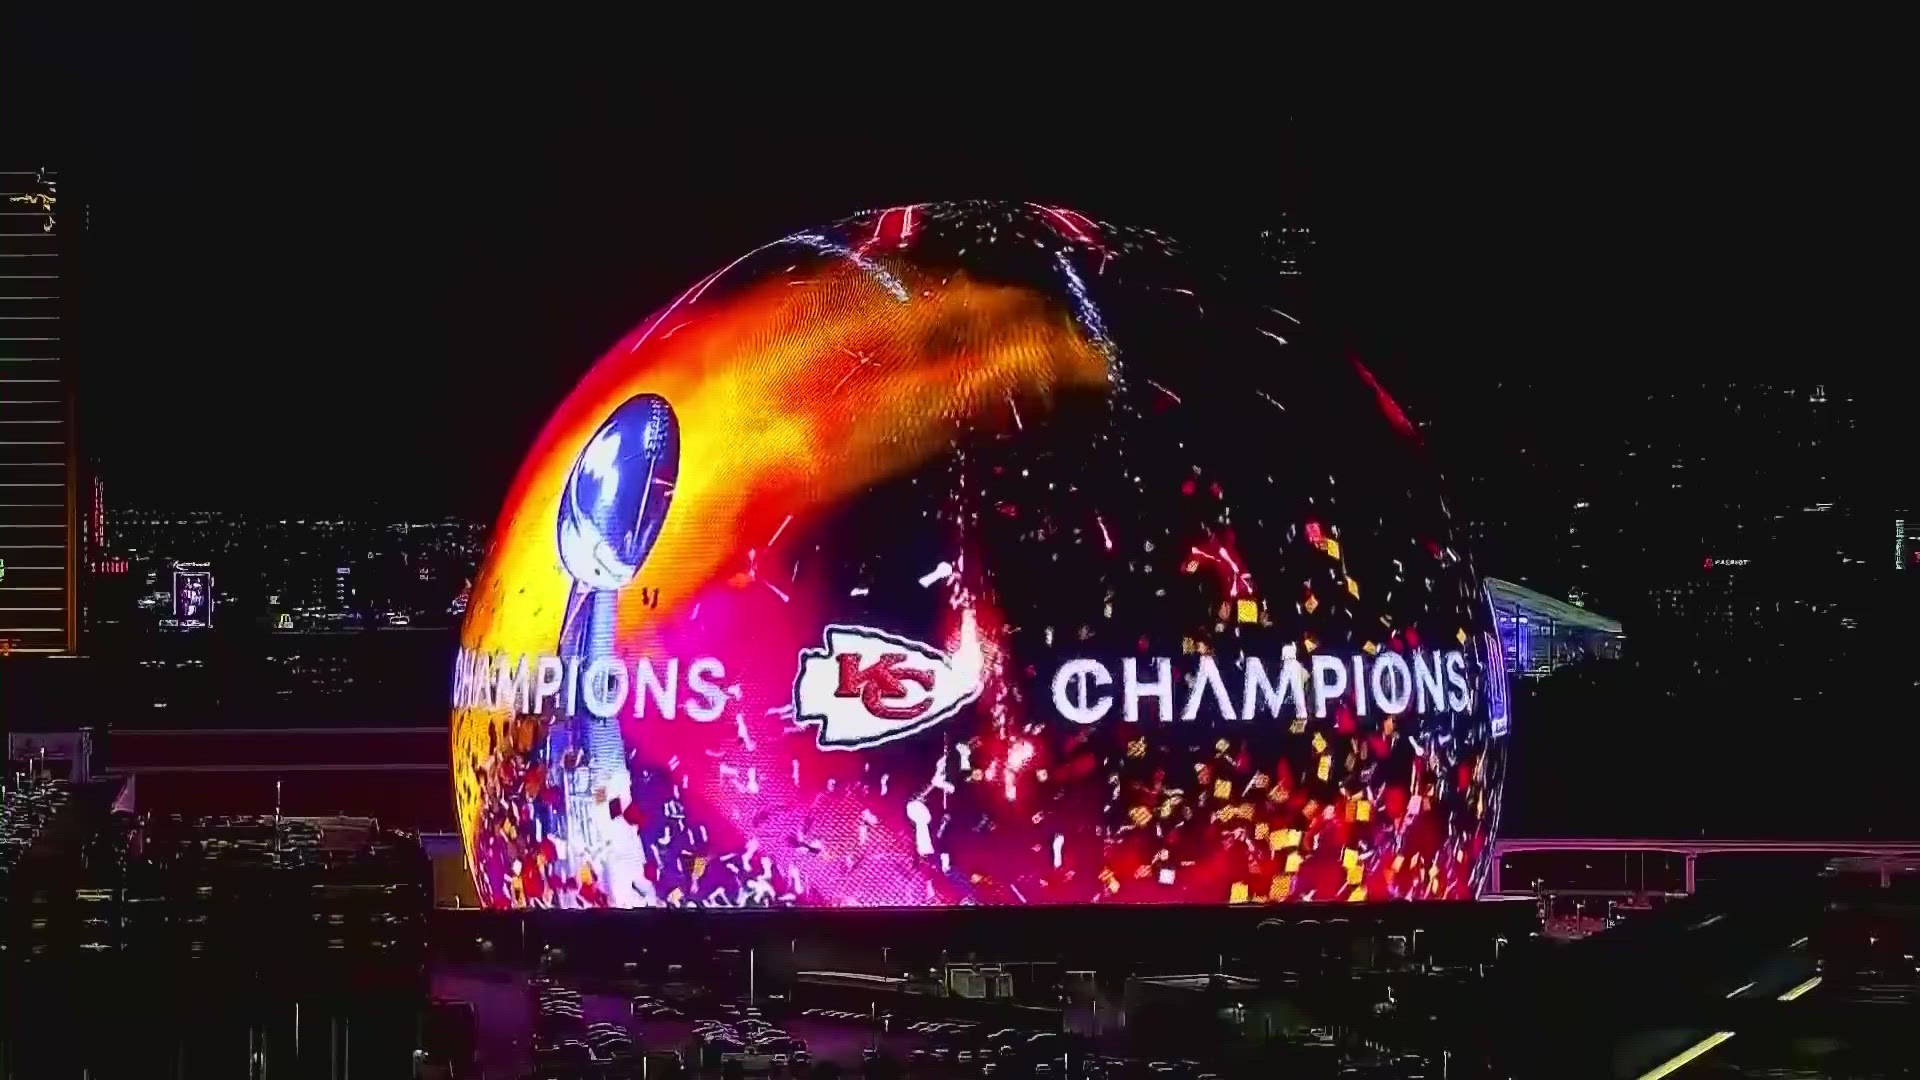 Kansas City Chiefs rallied to beat the San Francisco 49ers 25-22 on Sunday, becoming the first repeat Super Bowl champs in 19 years and ninth overall.